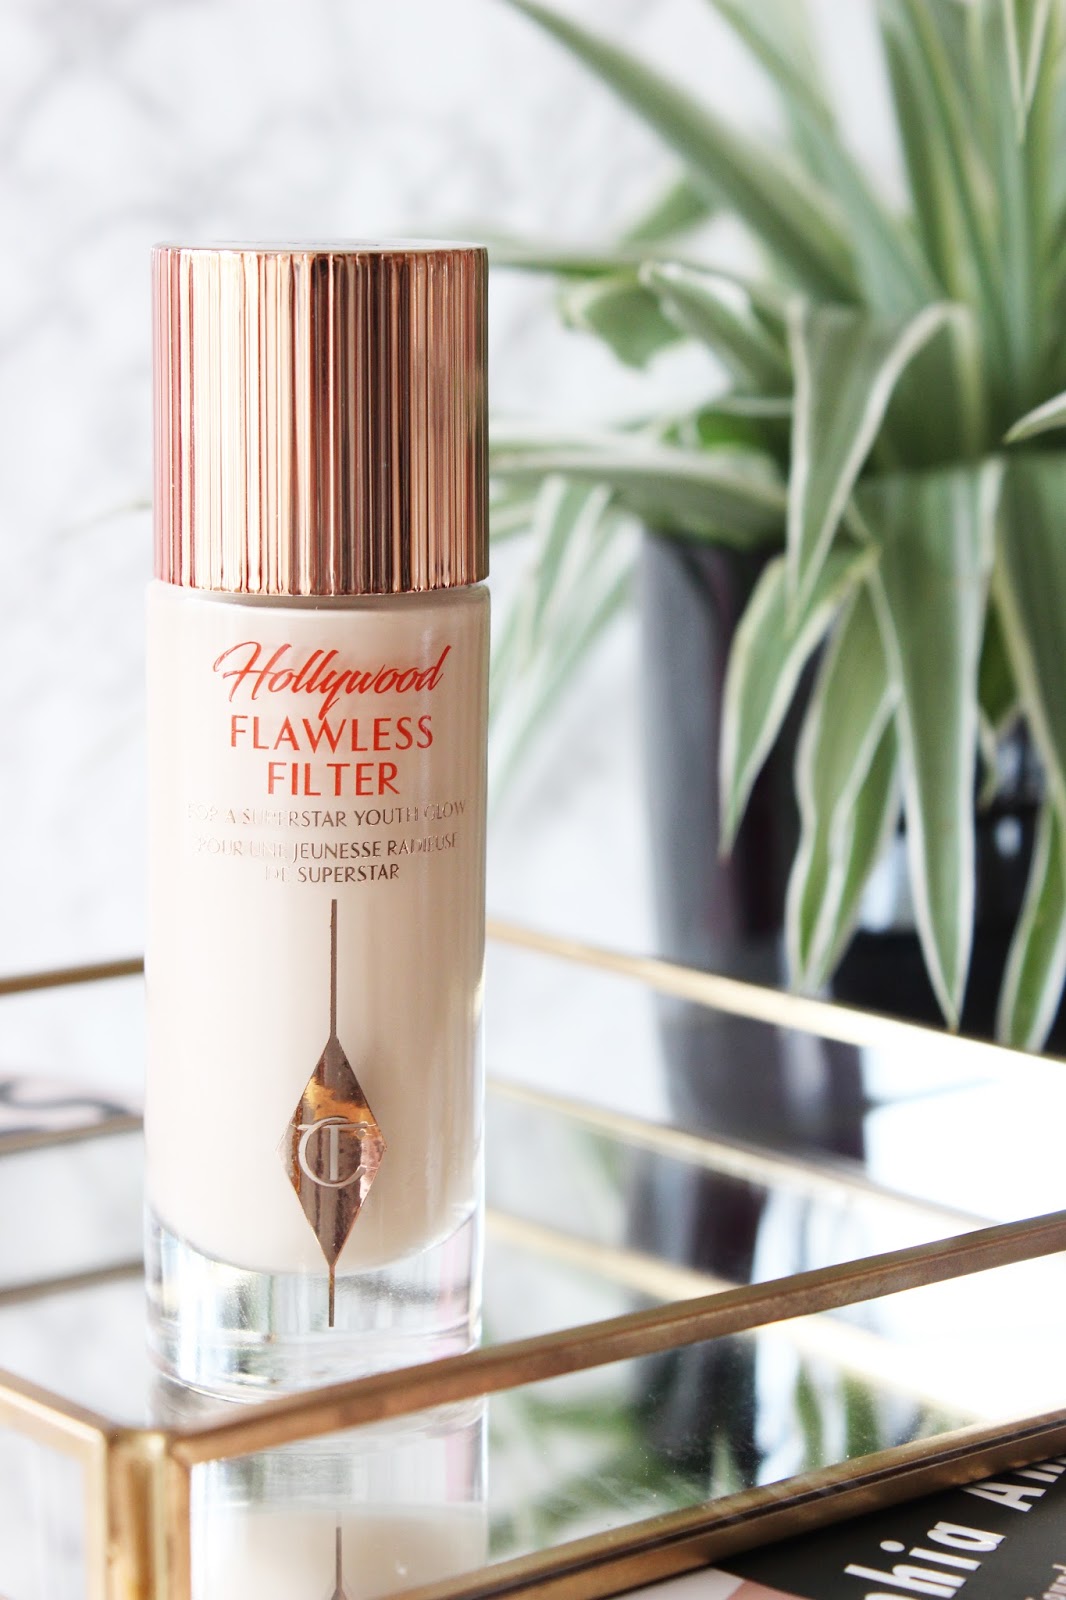 Charlotte Tilbury Hollywood Flawless Filter | Review & Swatches